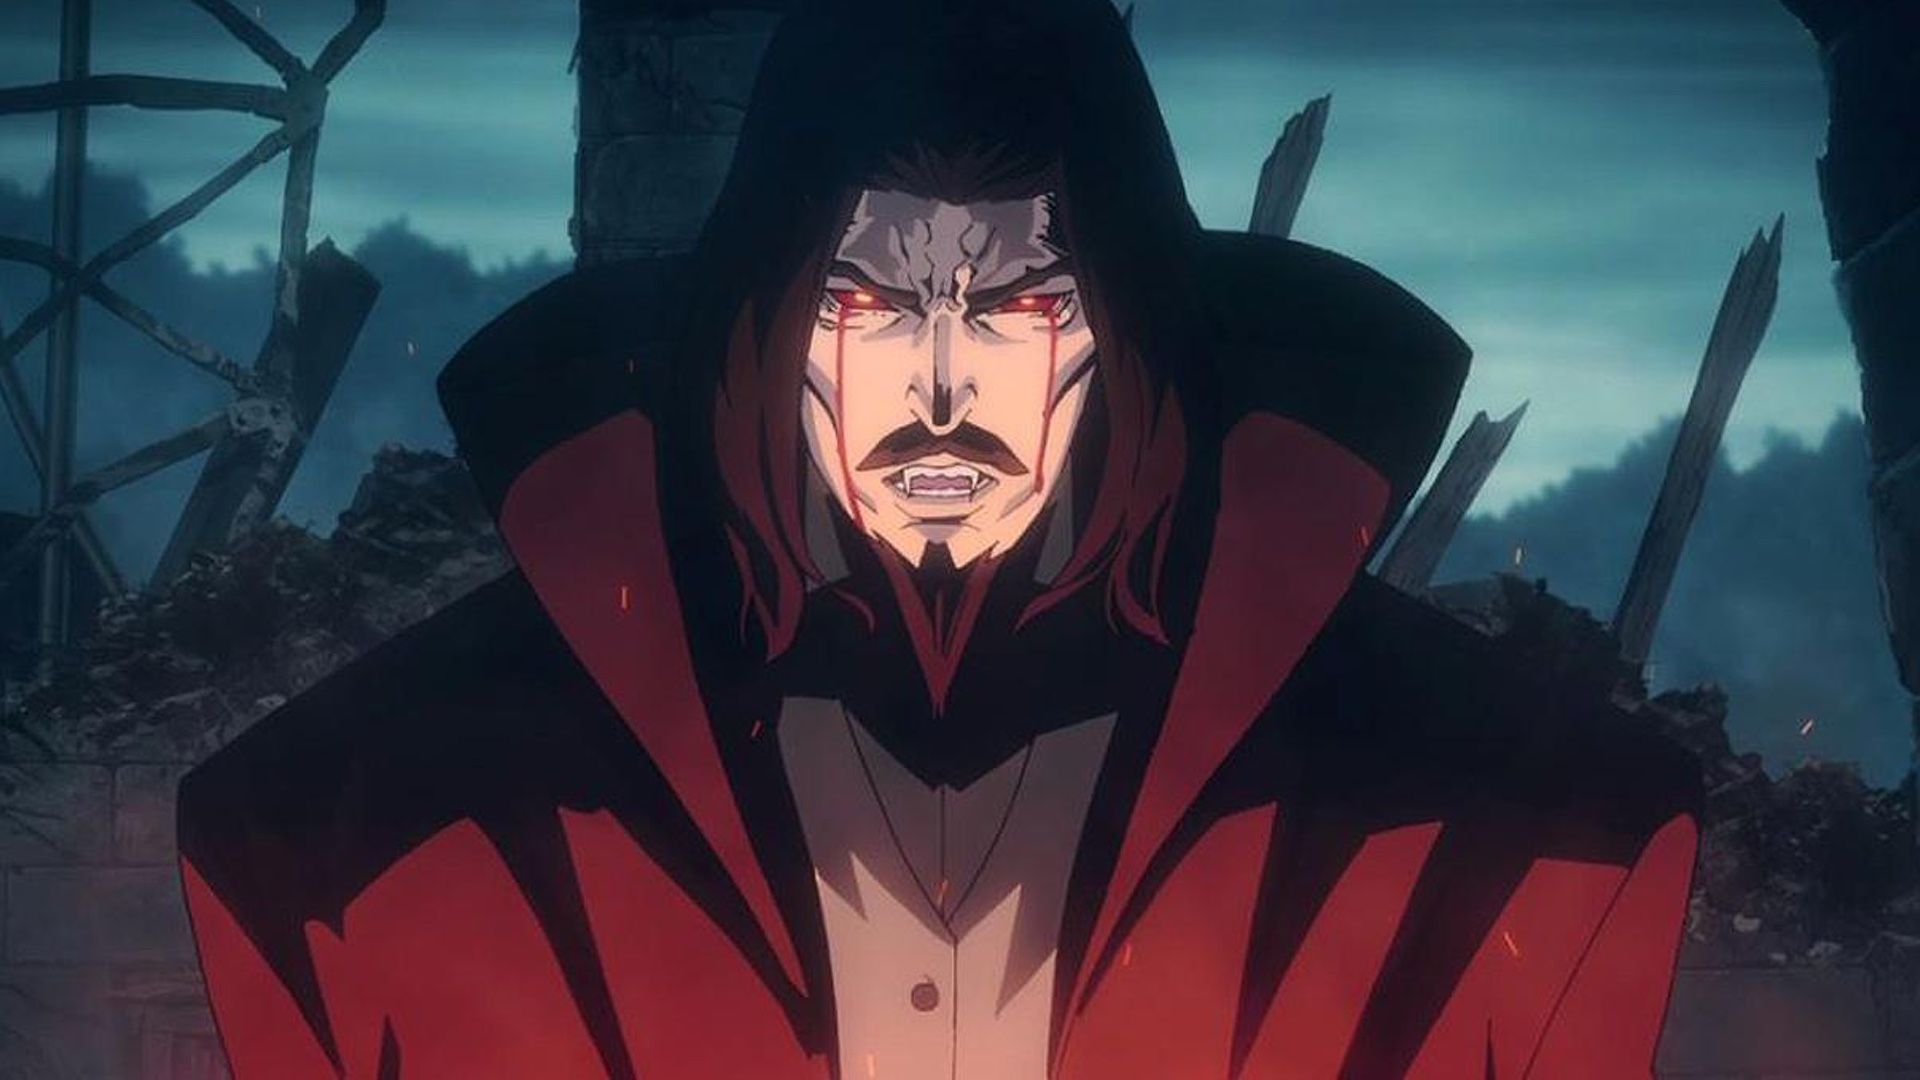 The Release Date For Netflix's CASTLEVANIA Season 2 Has Been Revealed